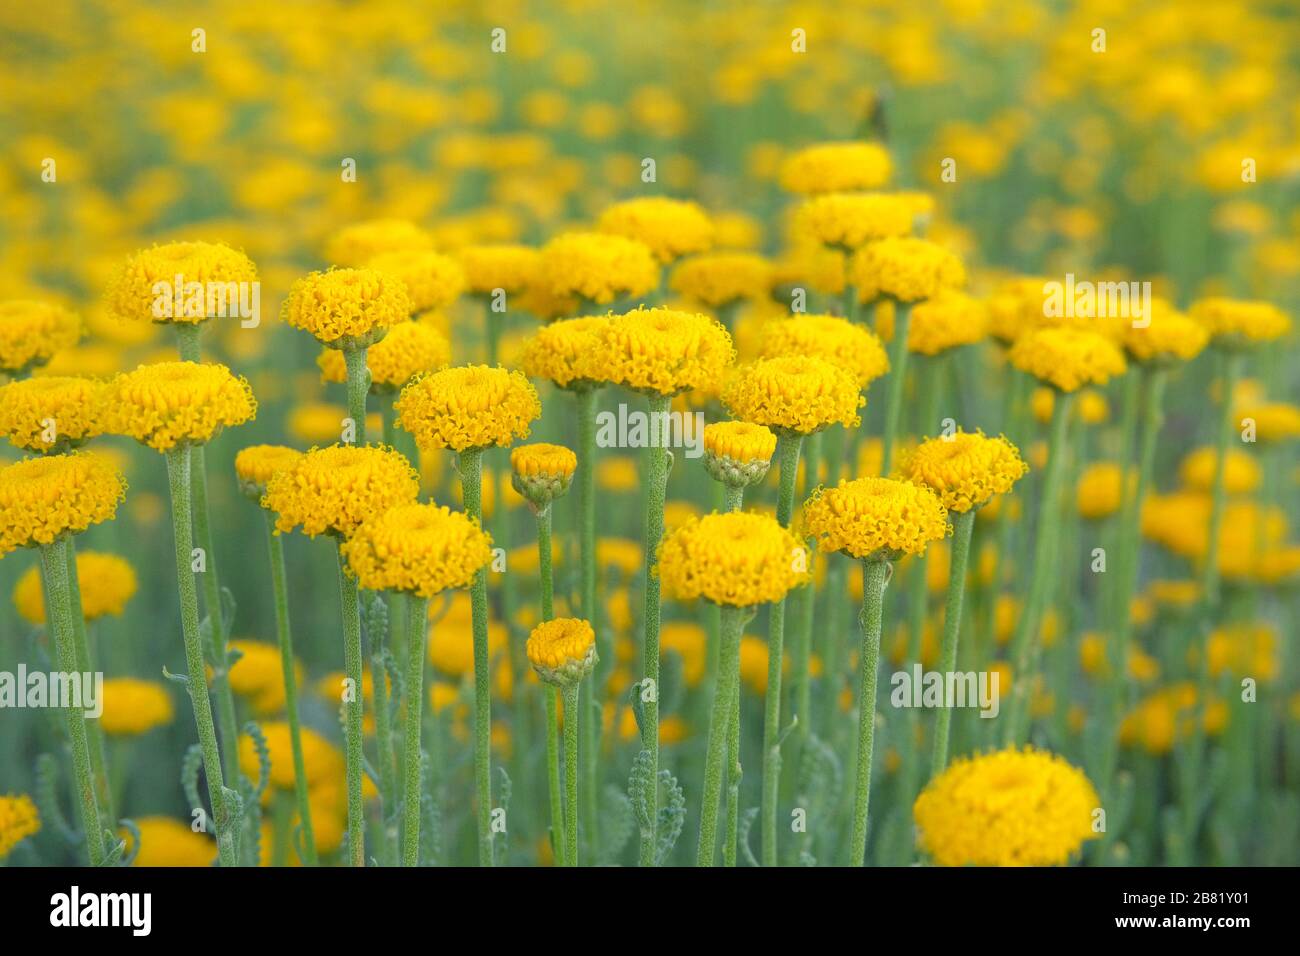 Helichrysum flowers on green nature blurred background. Yellow flowers for herbalism. Medicinal herb. Close up. Stock Photo